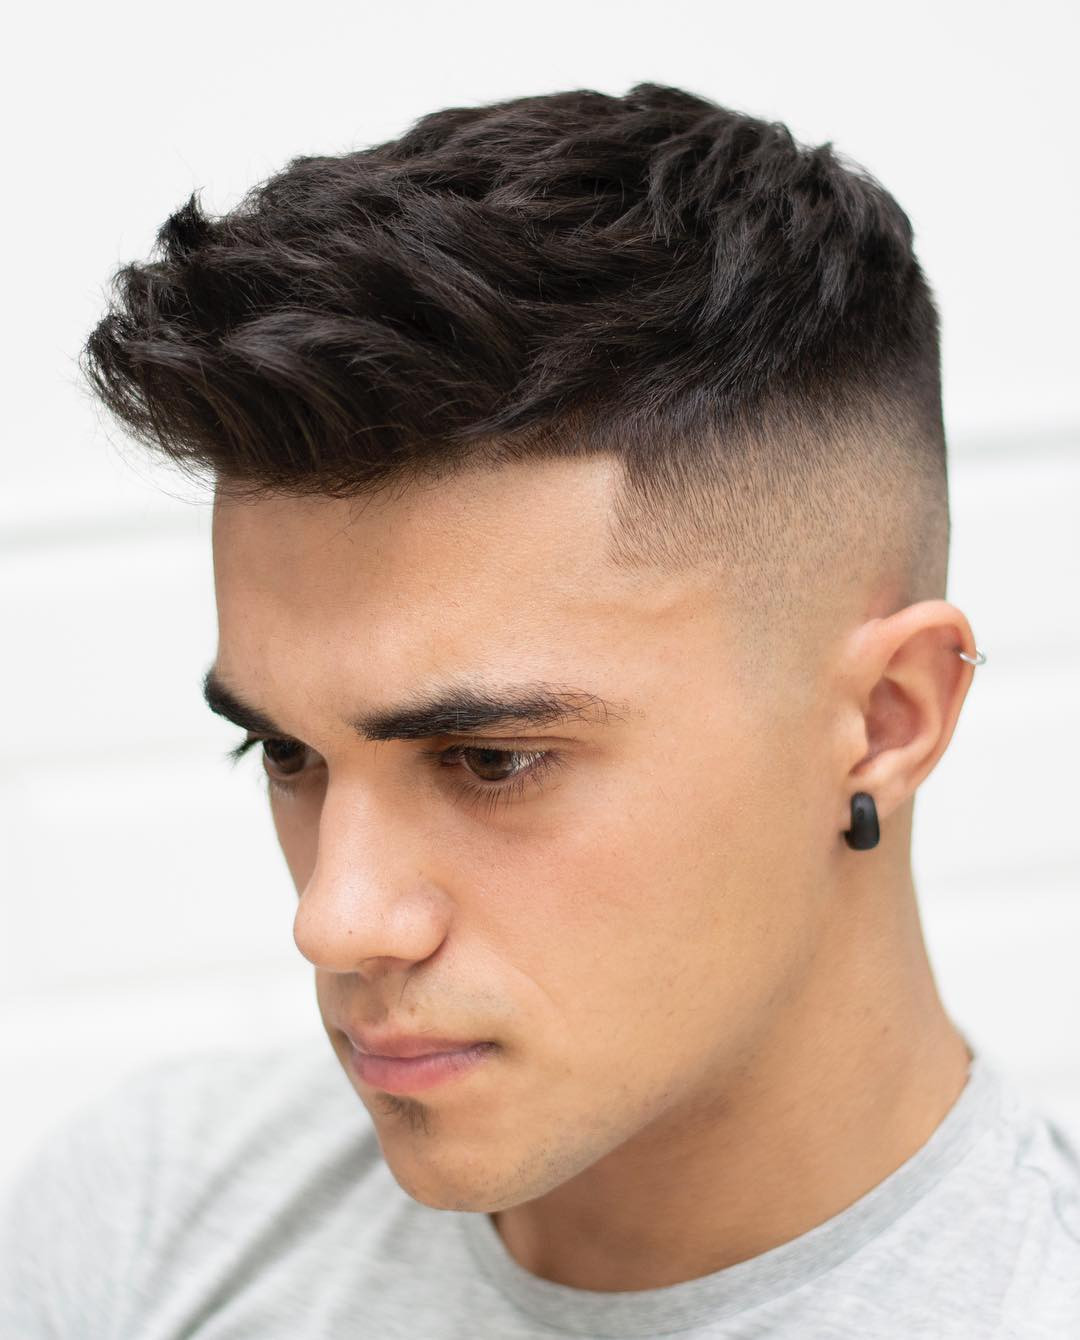 Young Males Hairstyles
 15 Teen Boy Haircuts For 2020